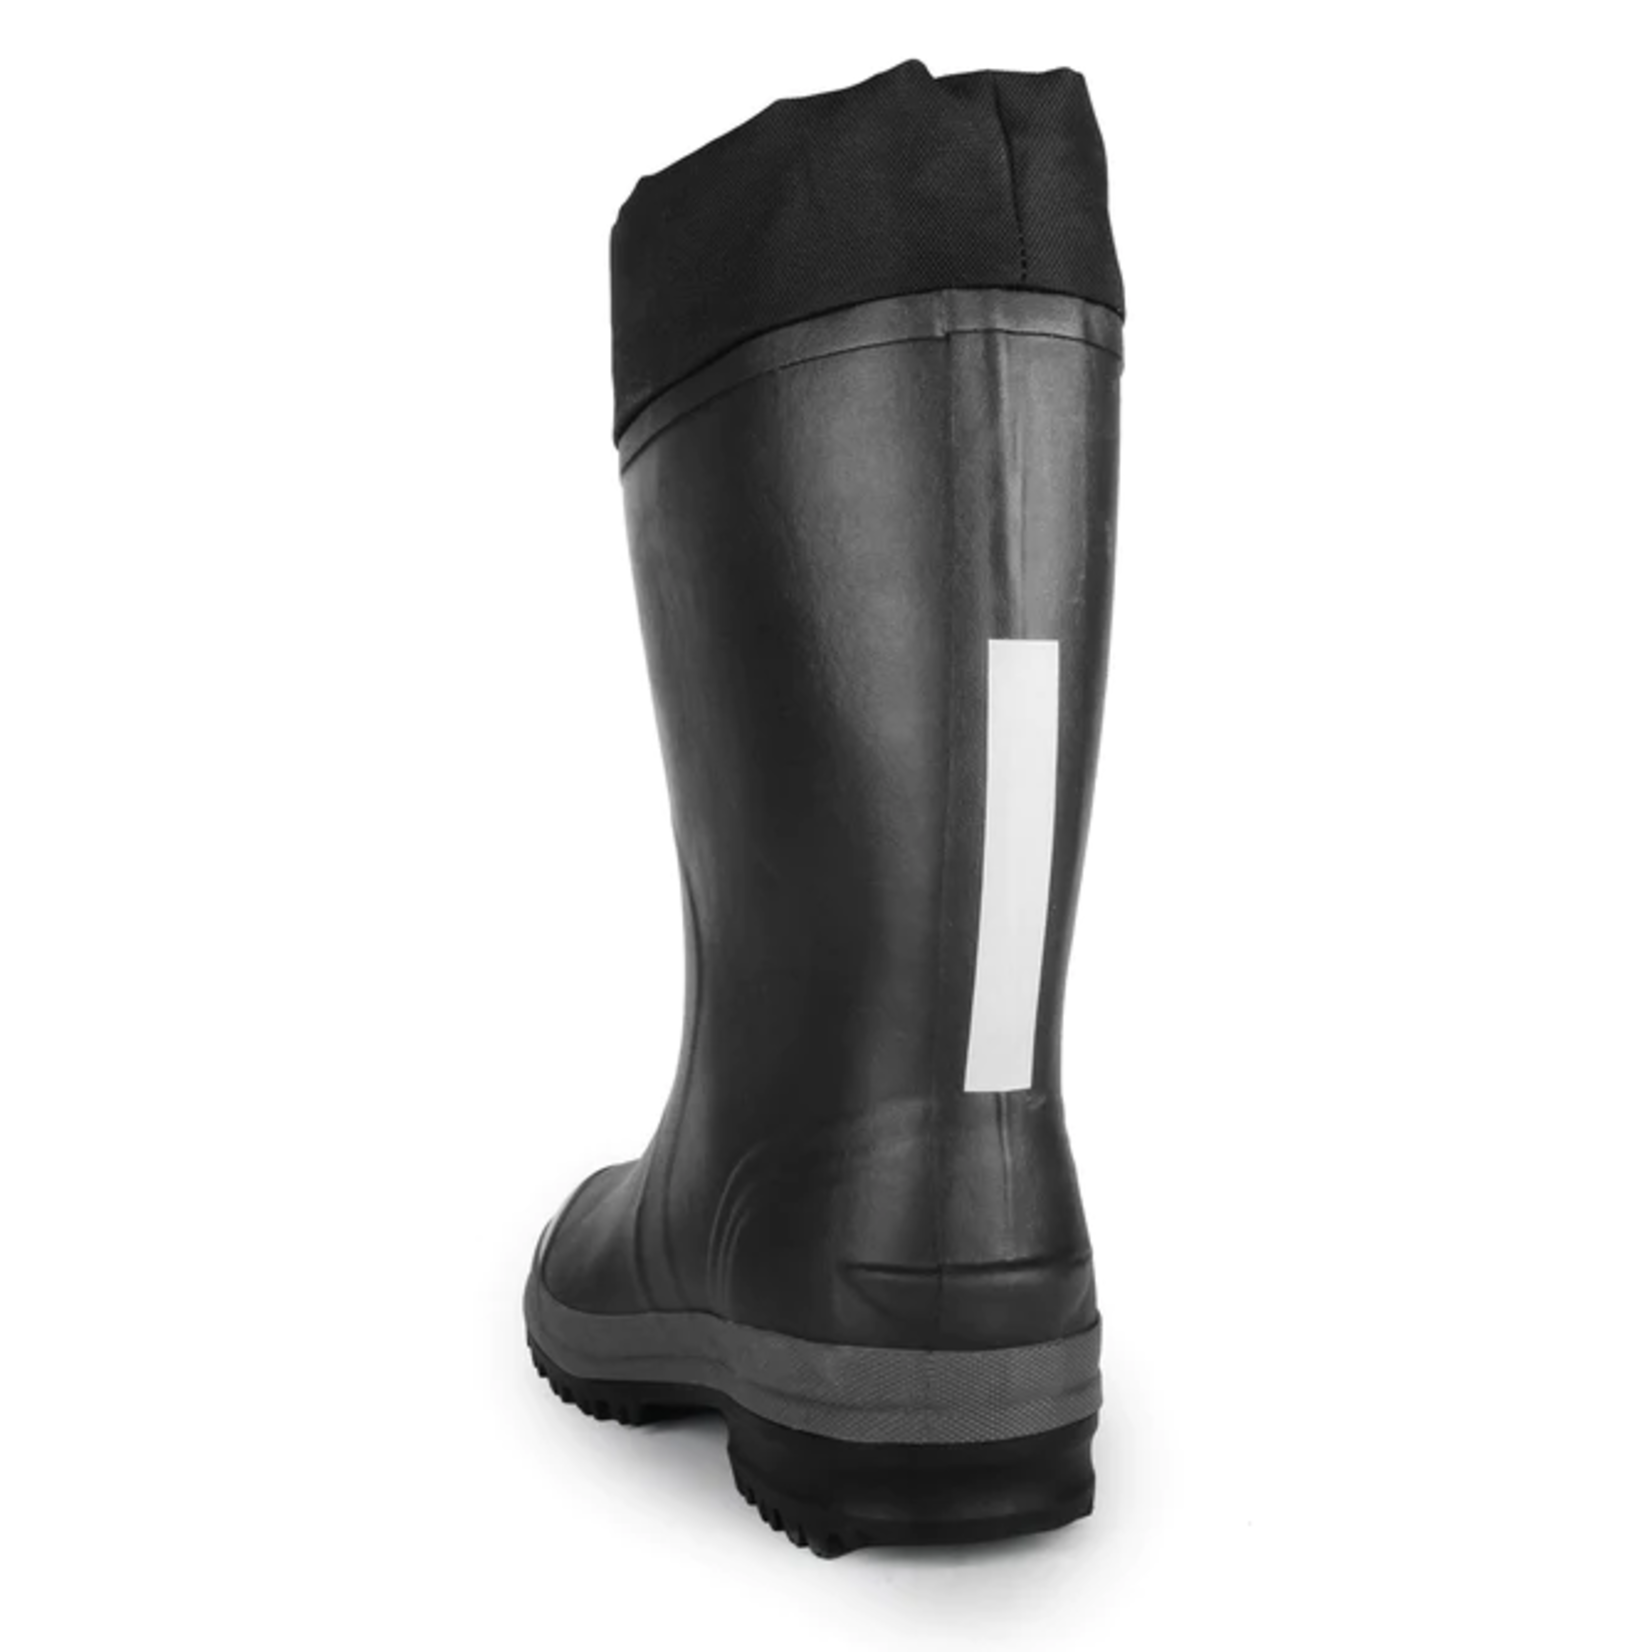 Acton Acton STC Beaufort Men’s CSA Black Water Proof and Insulated Rubber Boot Rated -60 Comfort Zone S22026-11